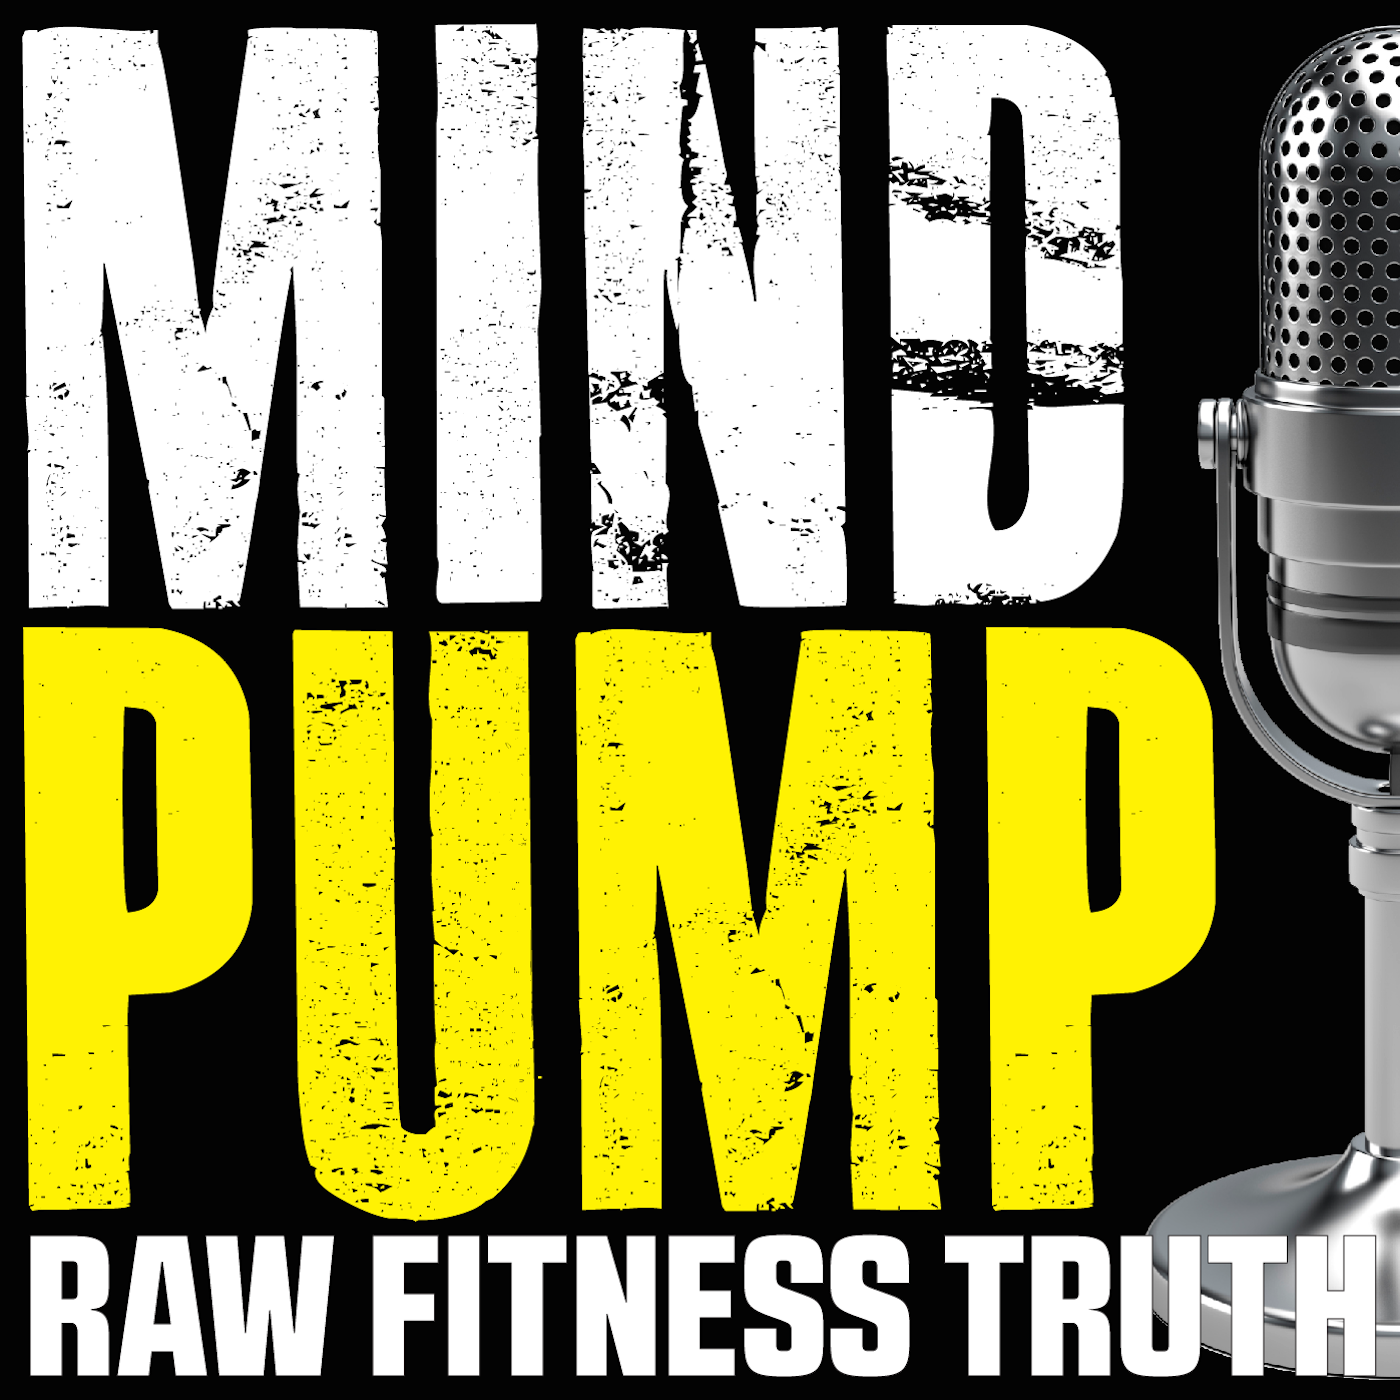 161: Best deadlifting grip, periodization, lifting while pregnant & MORE